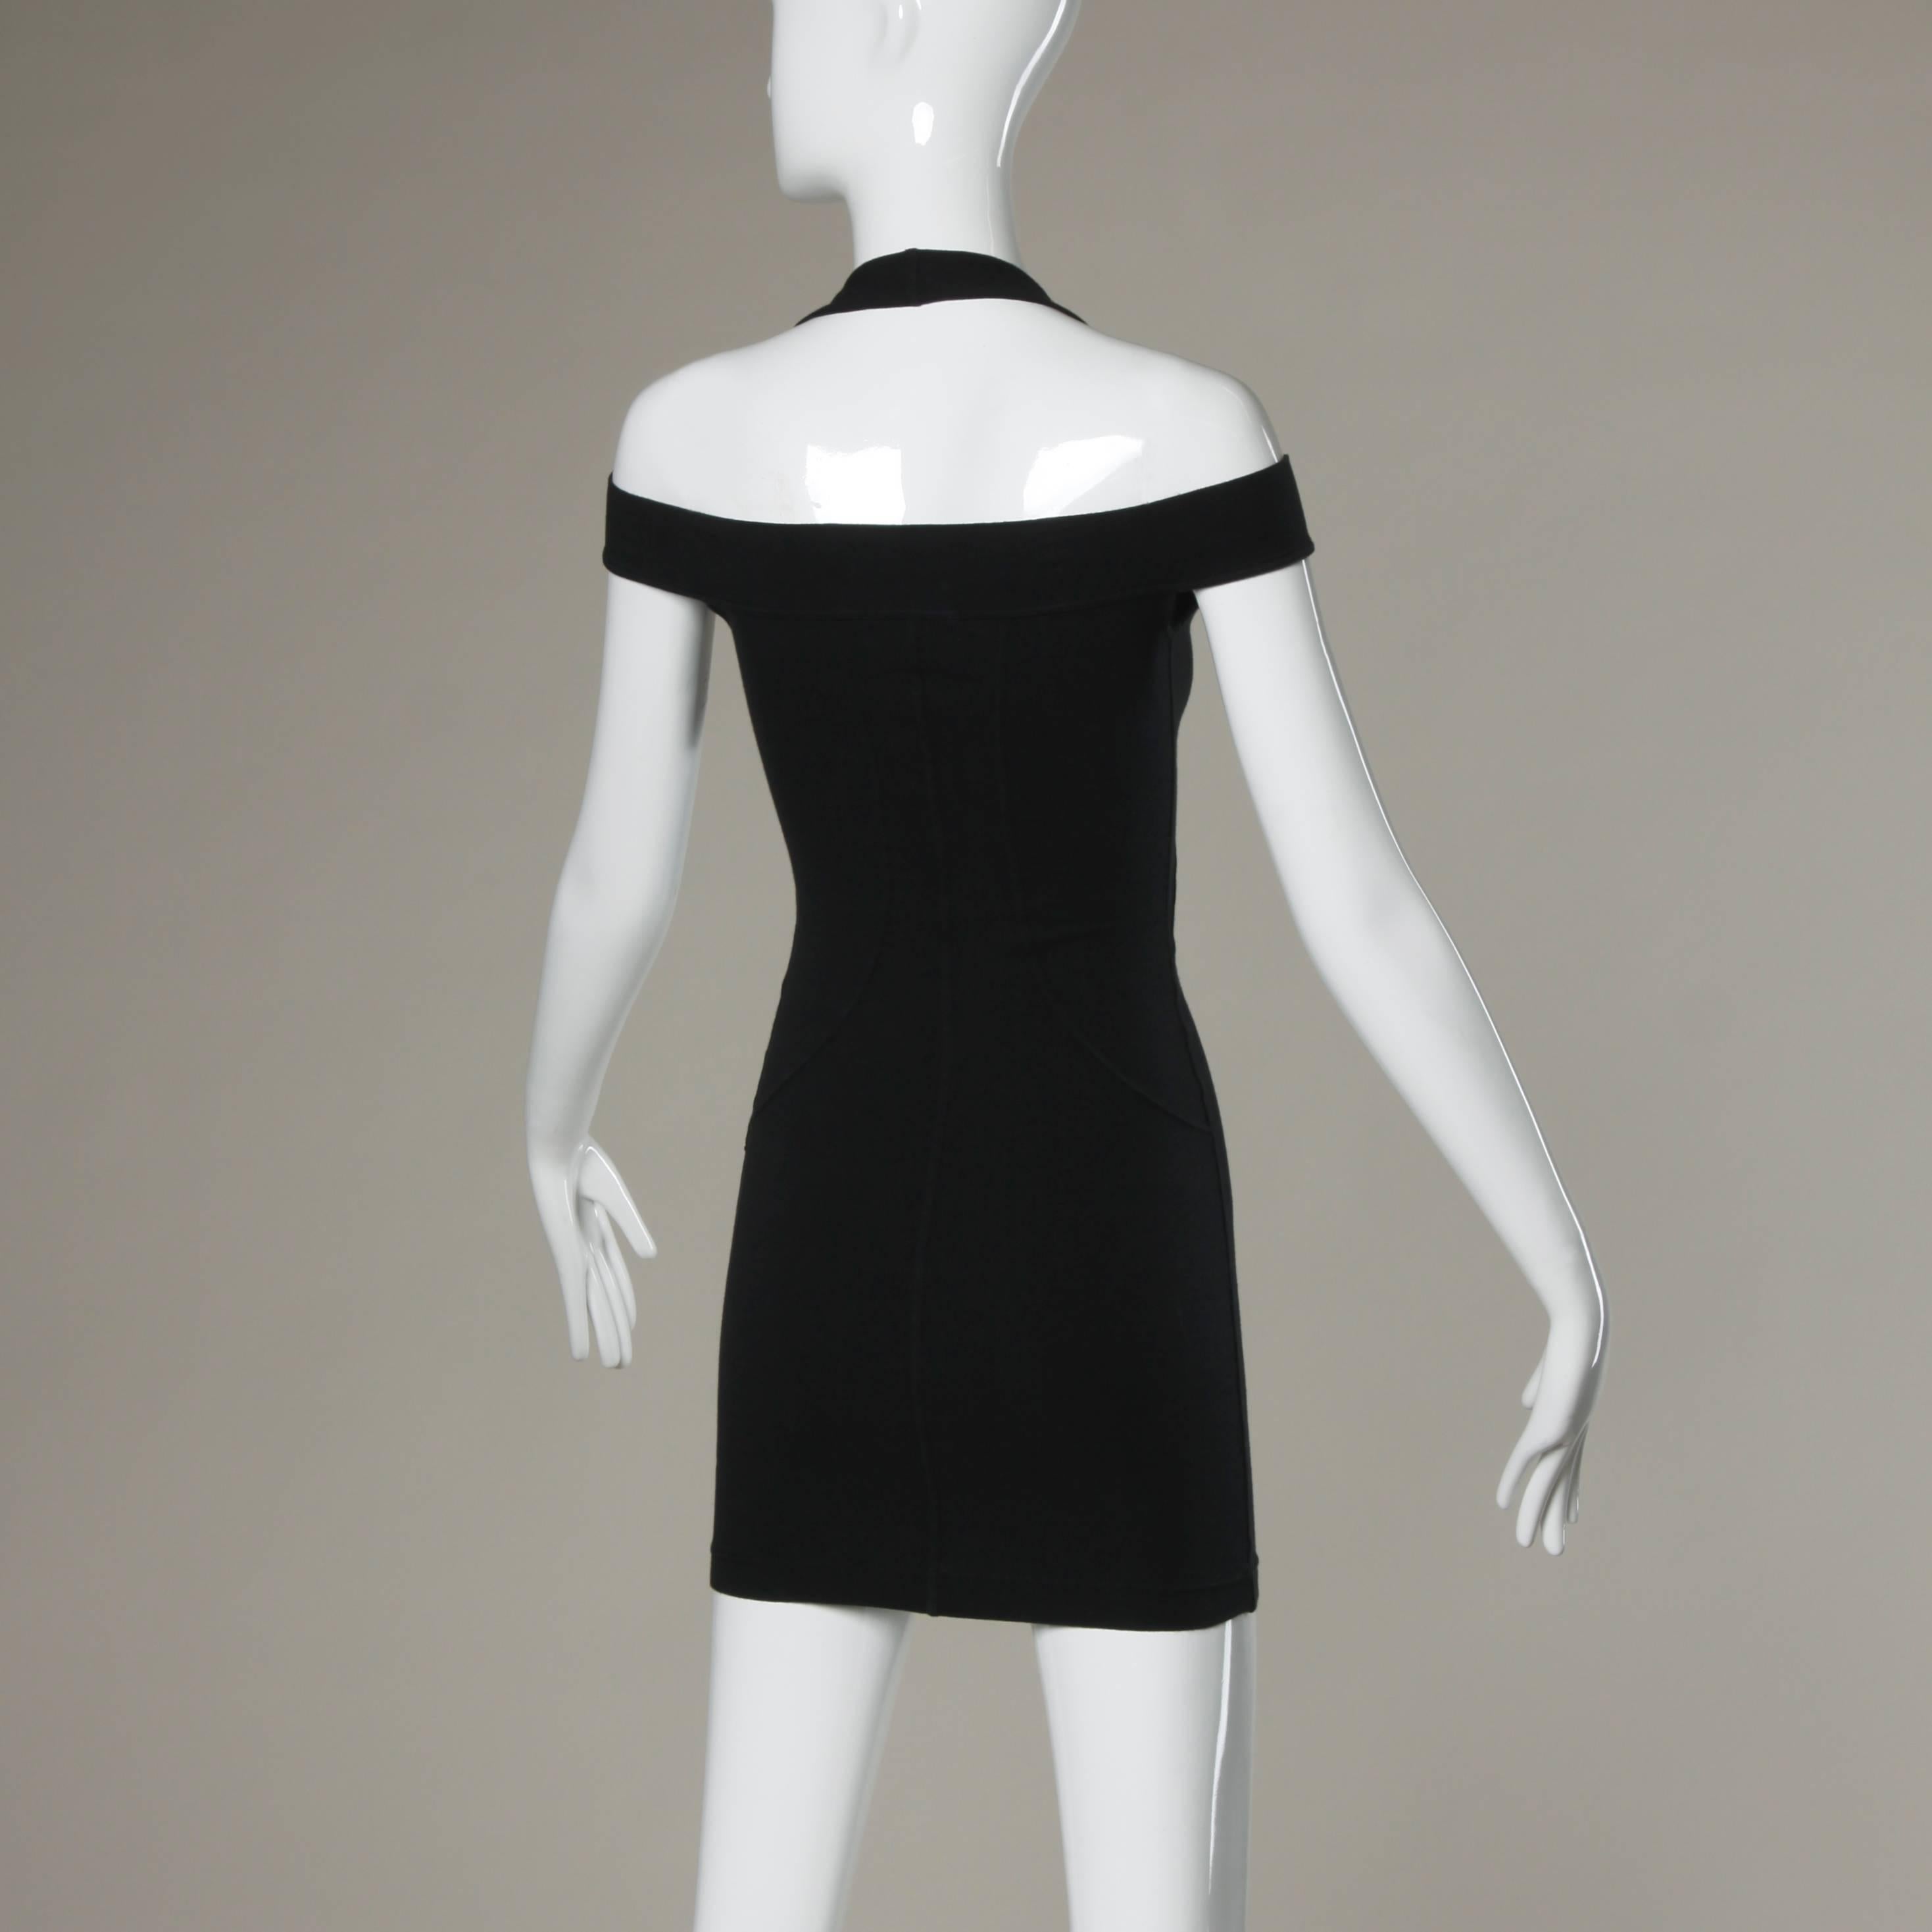 Sexy black stretchy body con dress by Claude Montana. Unique body hugging fit with cut out shoulders and halter neckline. No marked size, but fits like an XS-S.